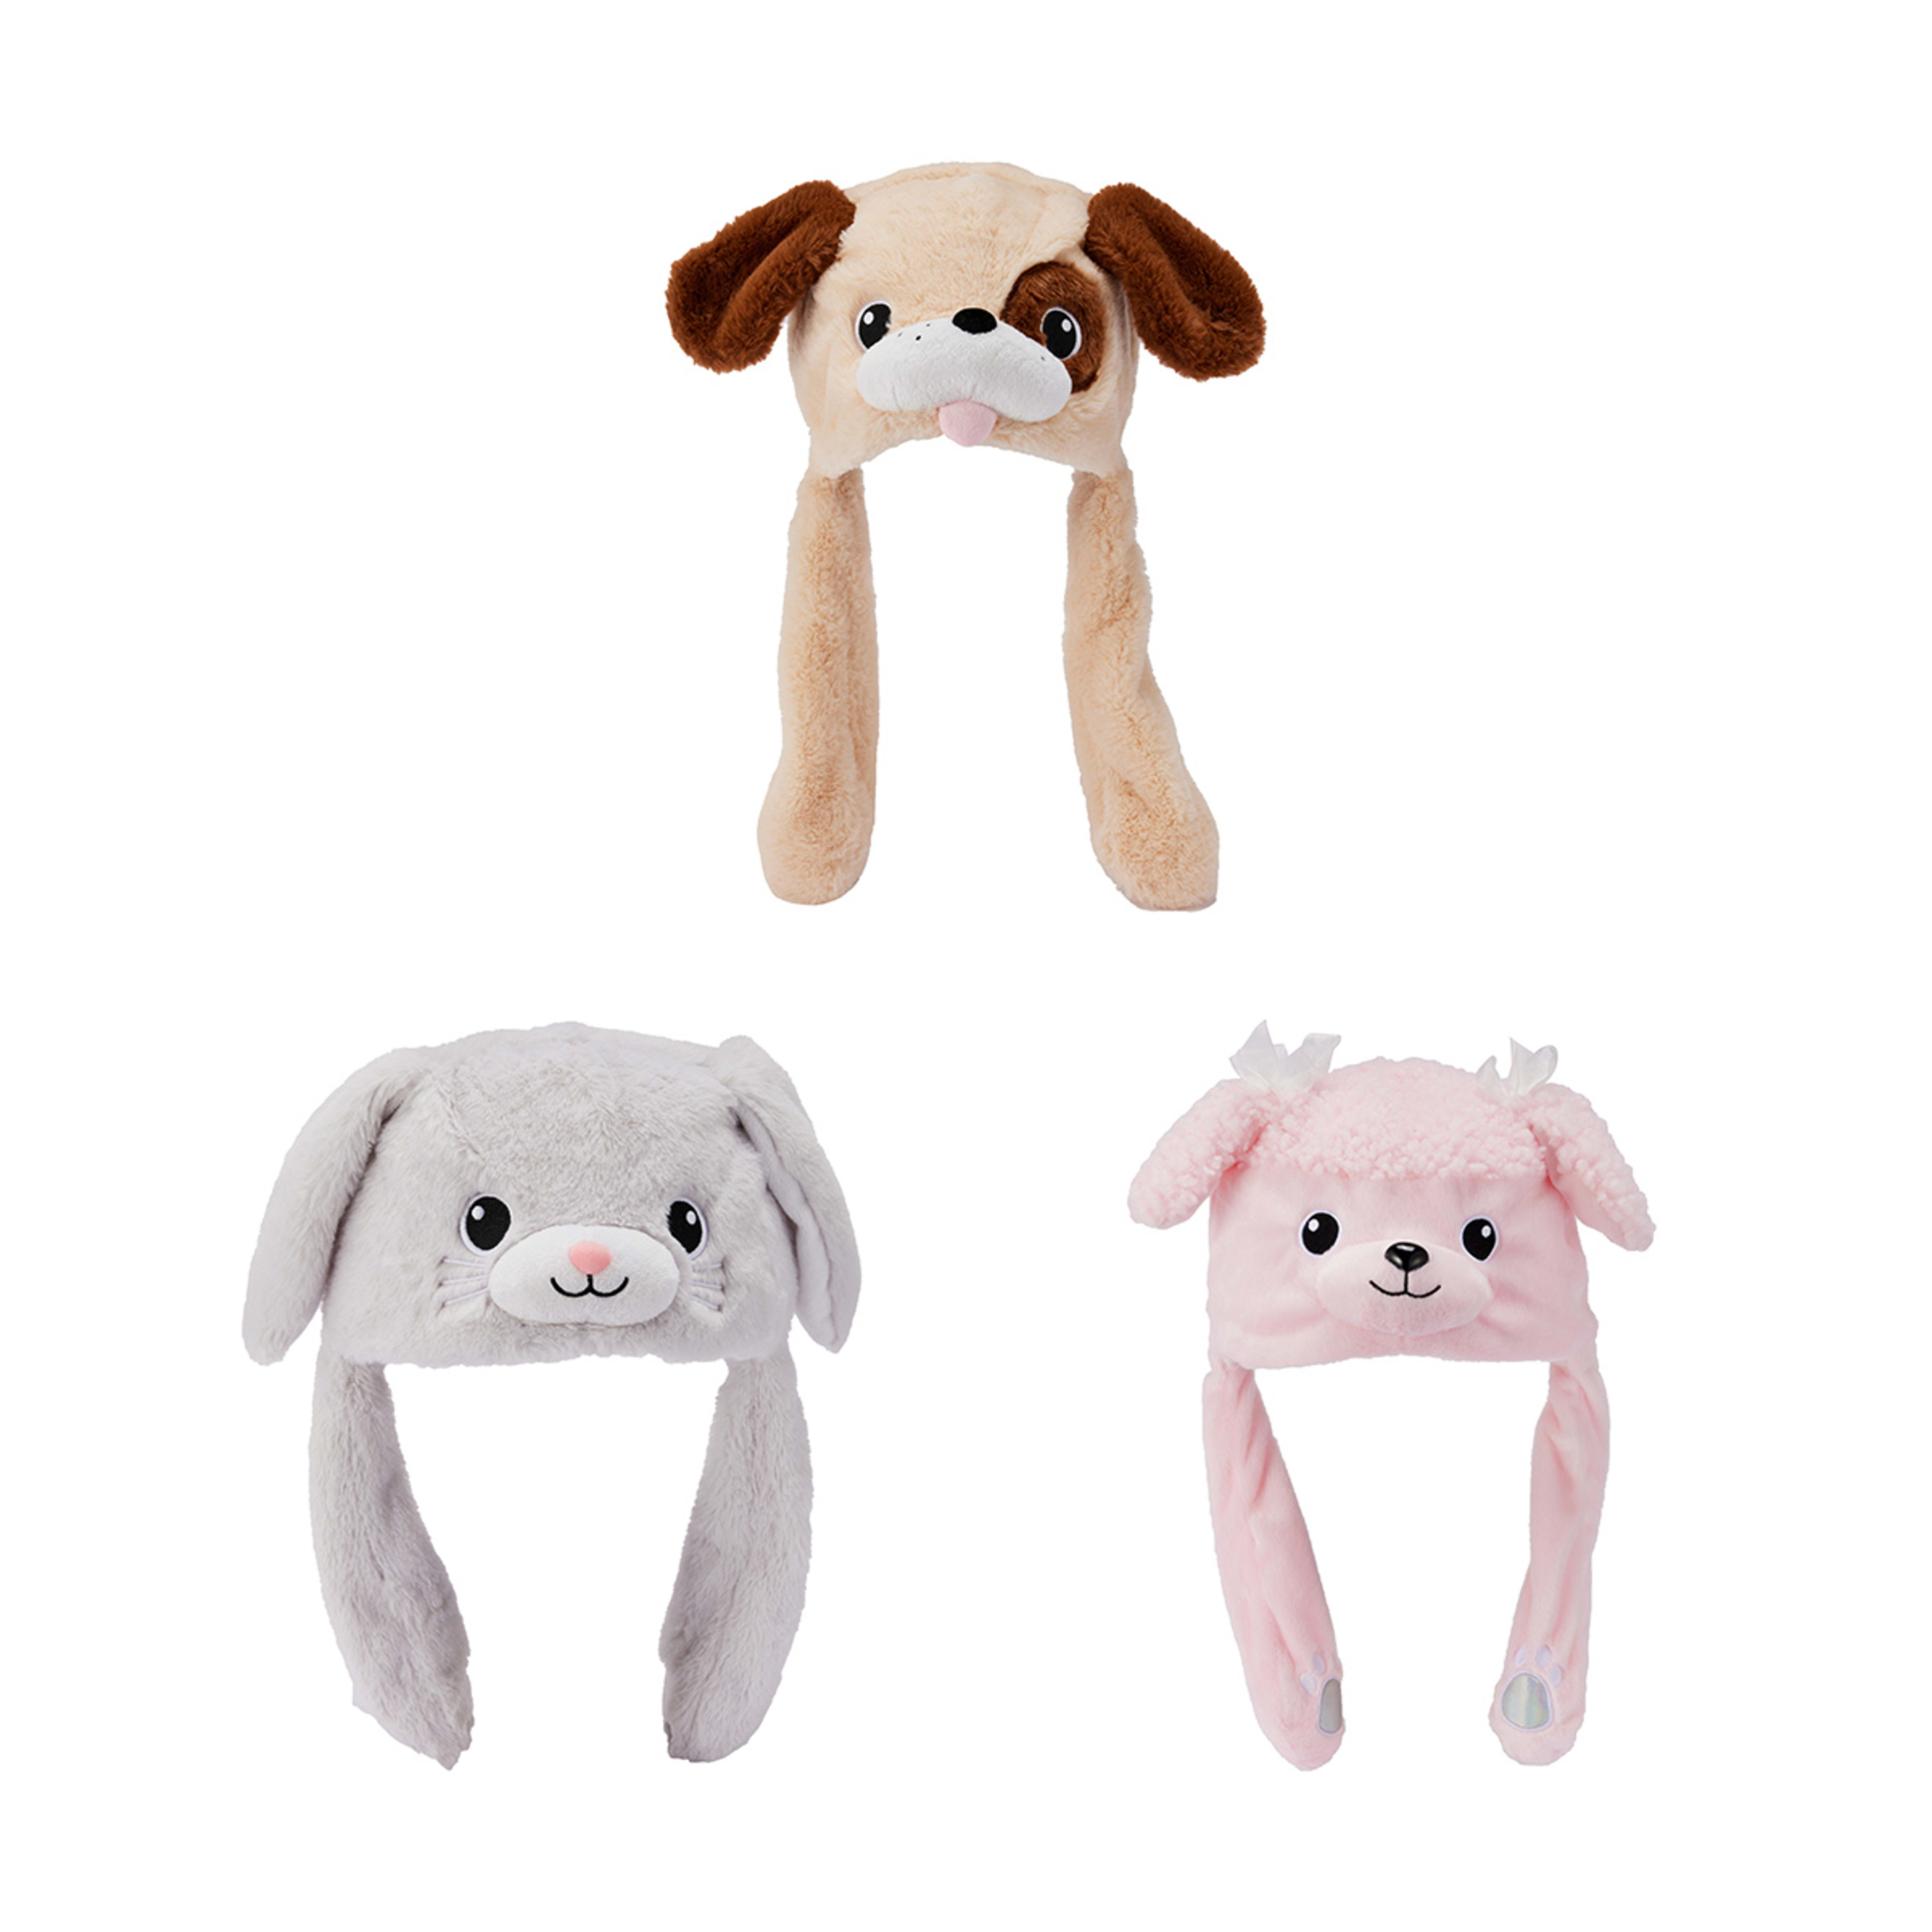 Flappy Ears Plush - Assorted - Kmart